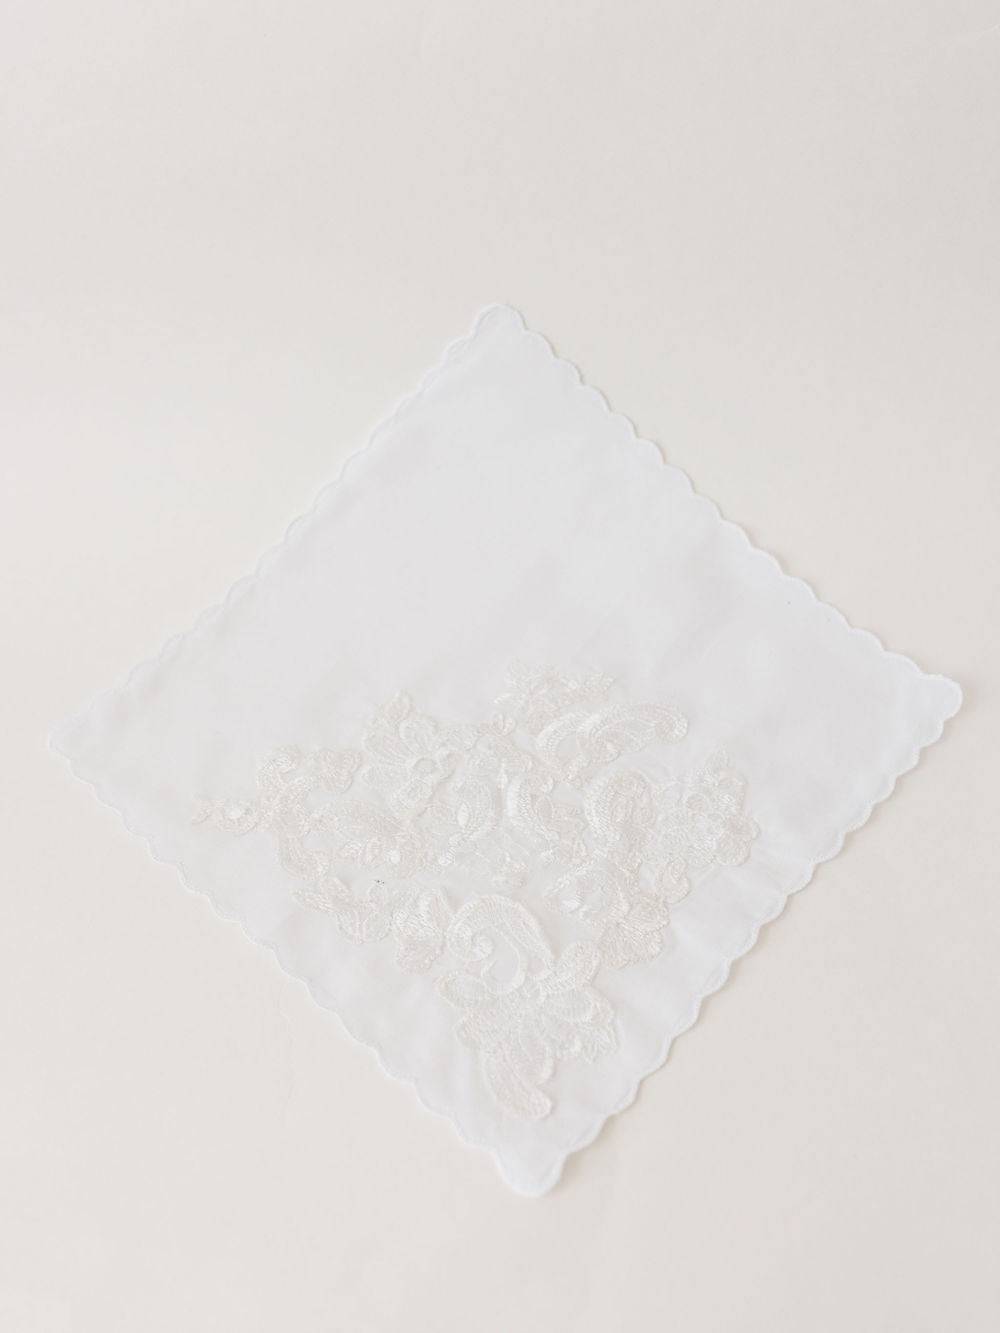 ivory handkerchief heirloom created from mom's wedding dress handcrafted by The Garter Girl